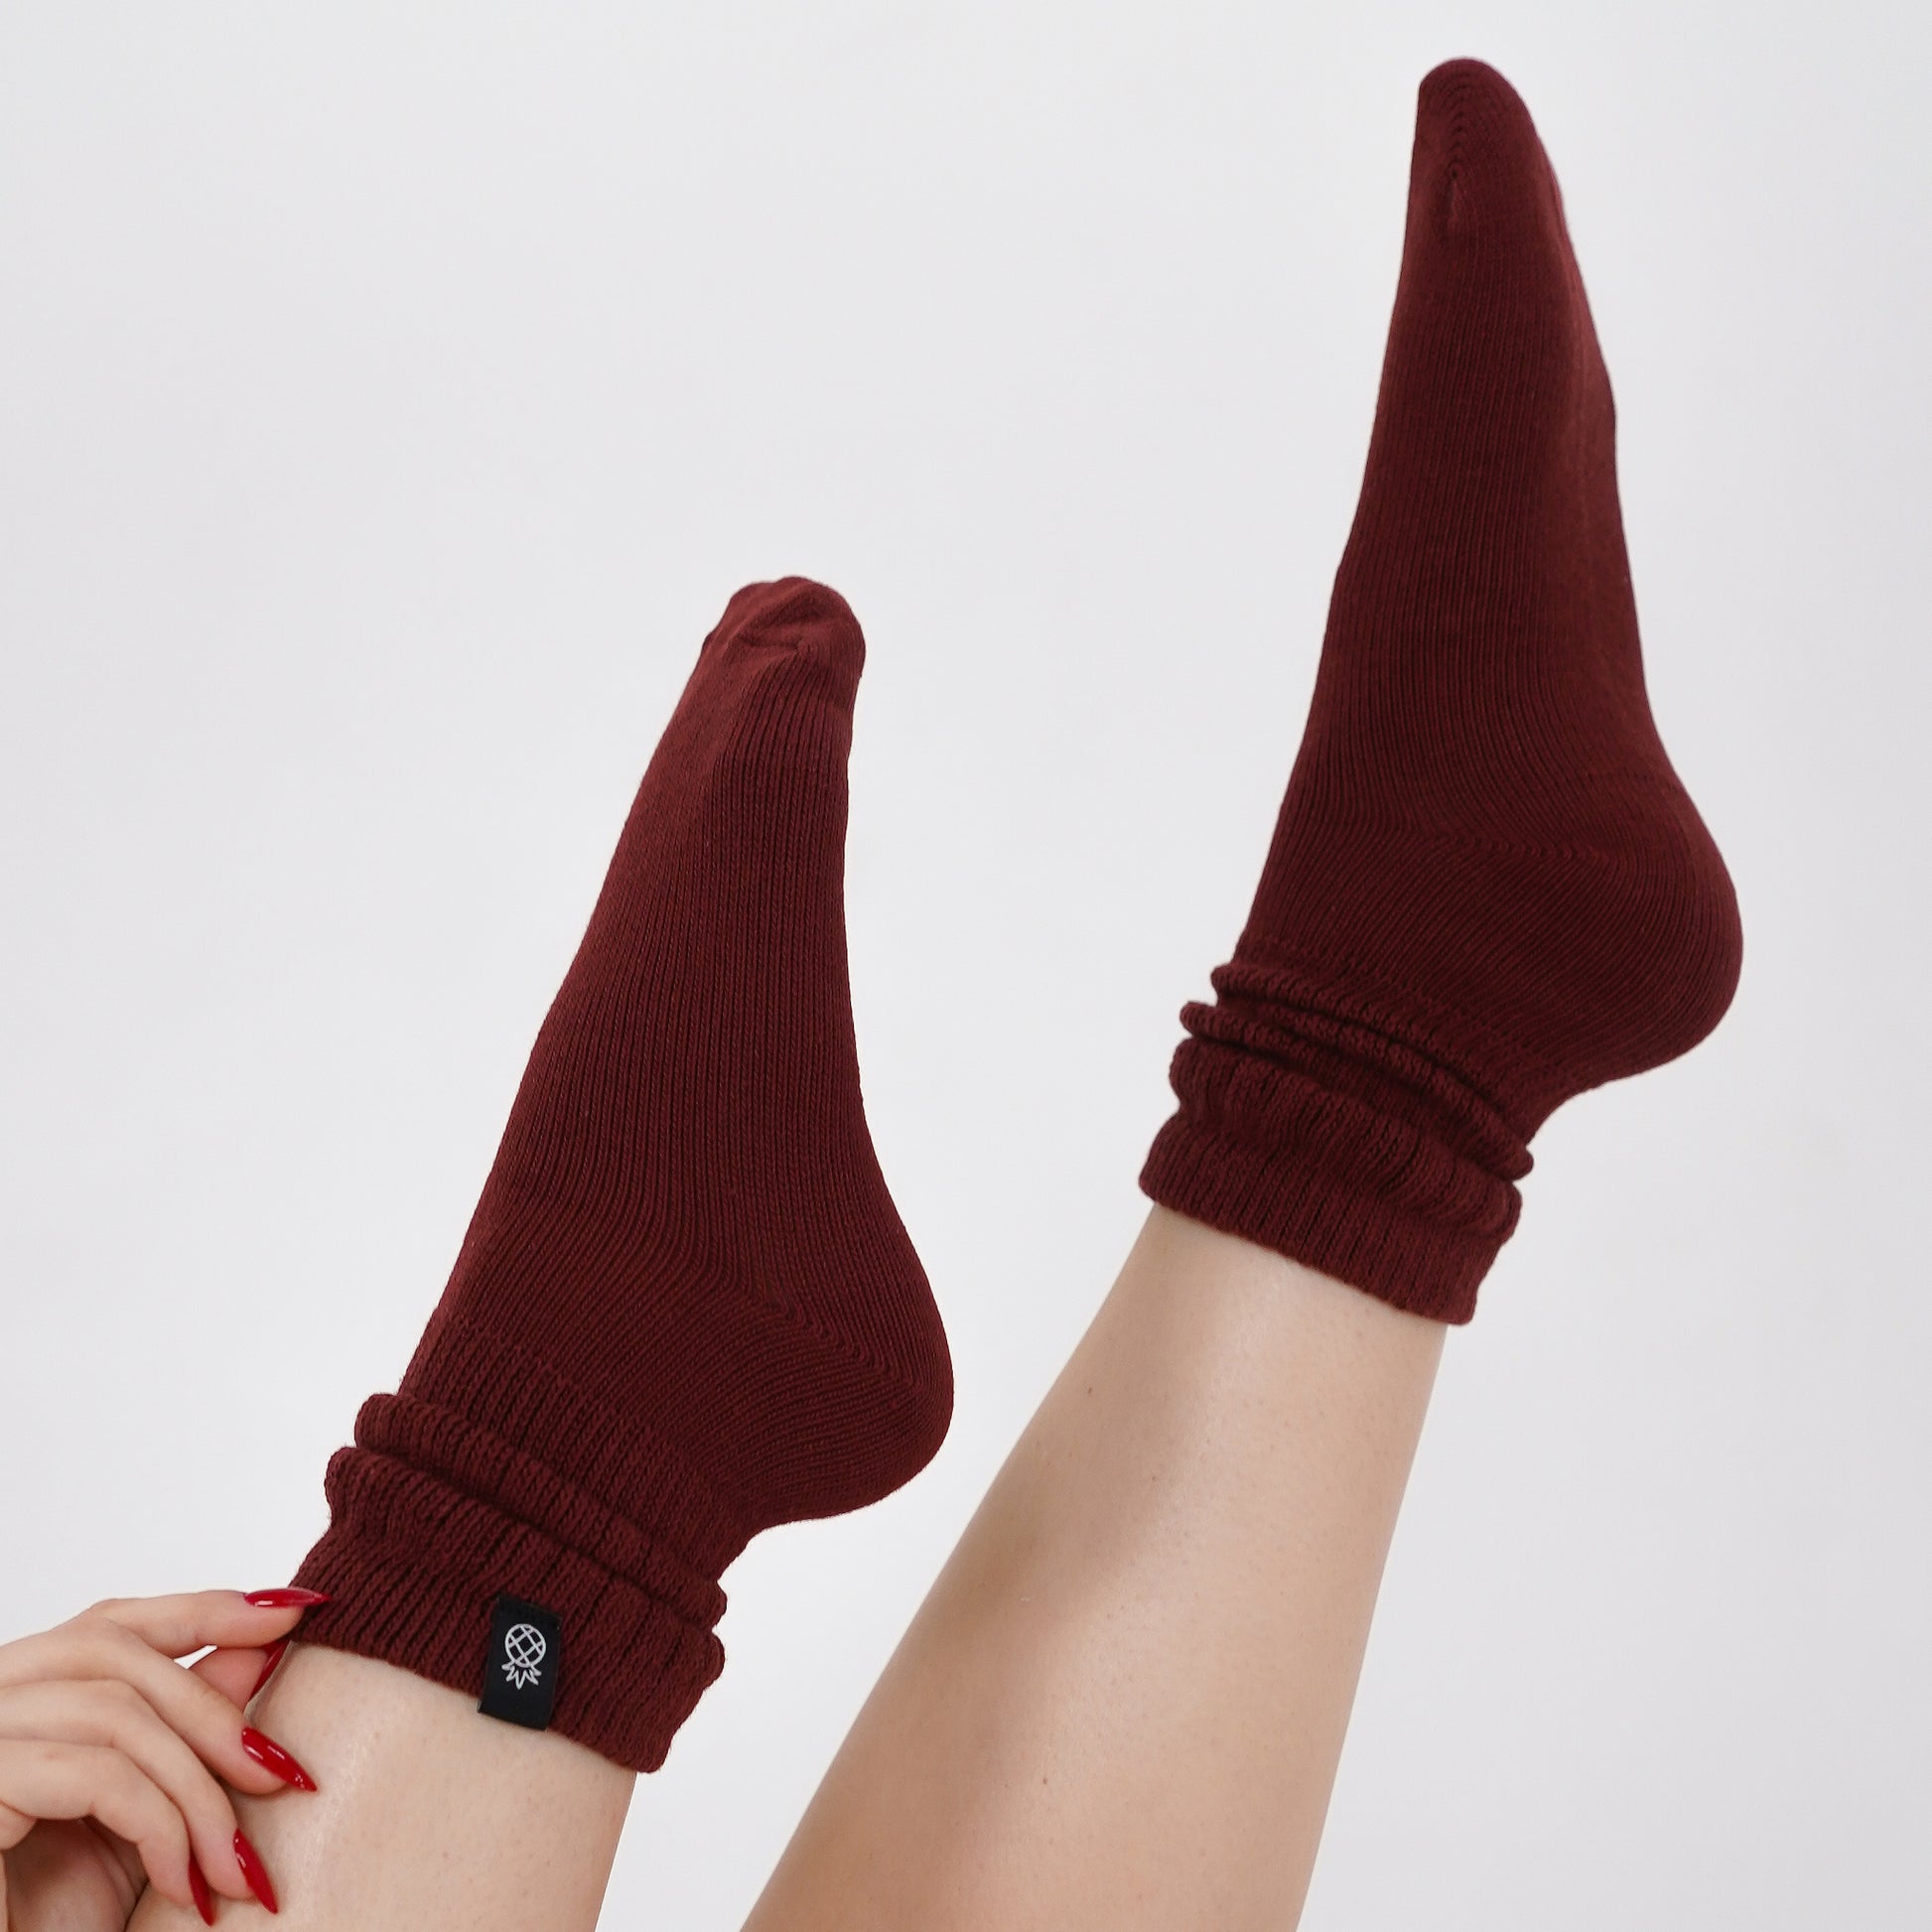 Pineapplebrat founder, influencer Alice Bozinovski, wears the Essential Scrunch Socks in Maroon. Cozy up in style with our soft, breathable knit socks. These slouchy-fit socks offer the ultimate comfort for everyday wear, at home or for workouts.